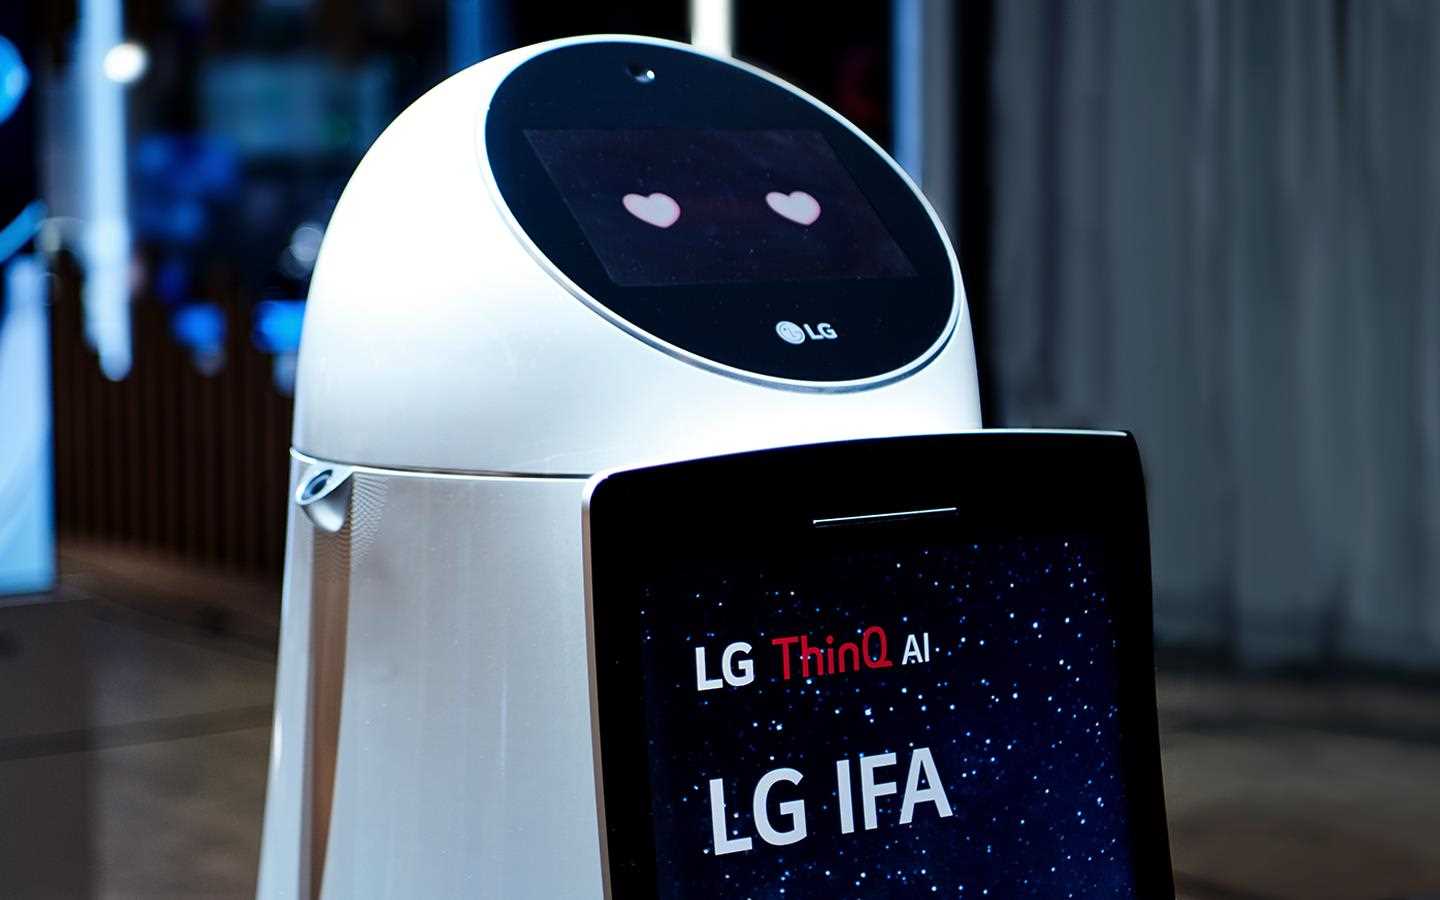 IFA 2018: CLOi GuideBot on show LG's AI-focused exhibition